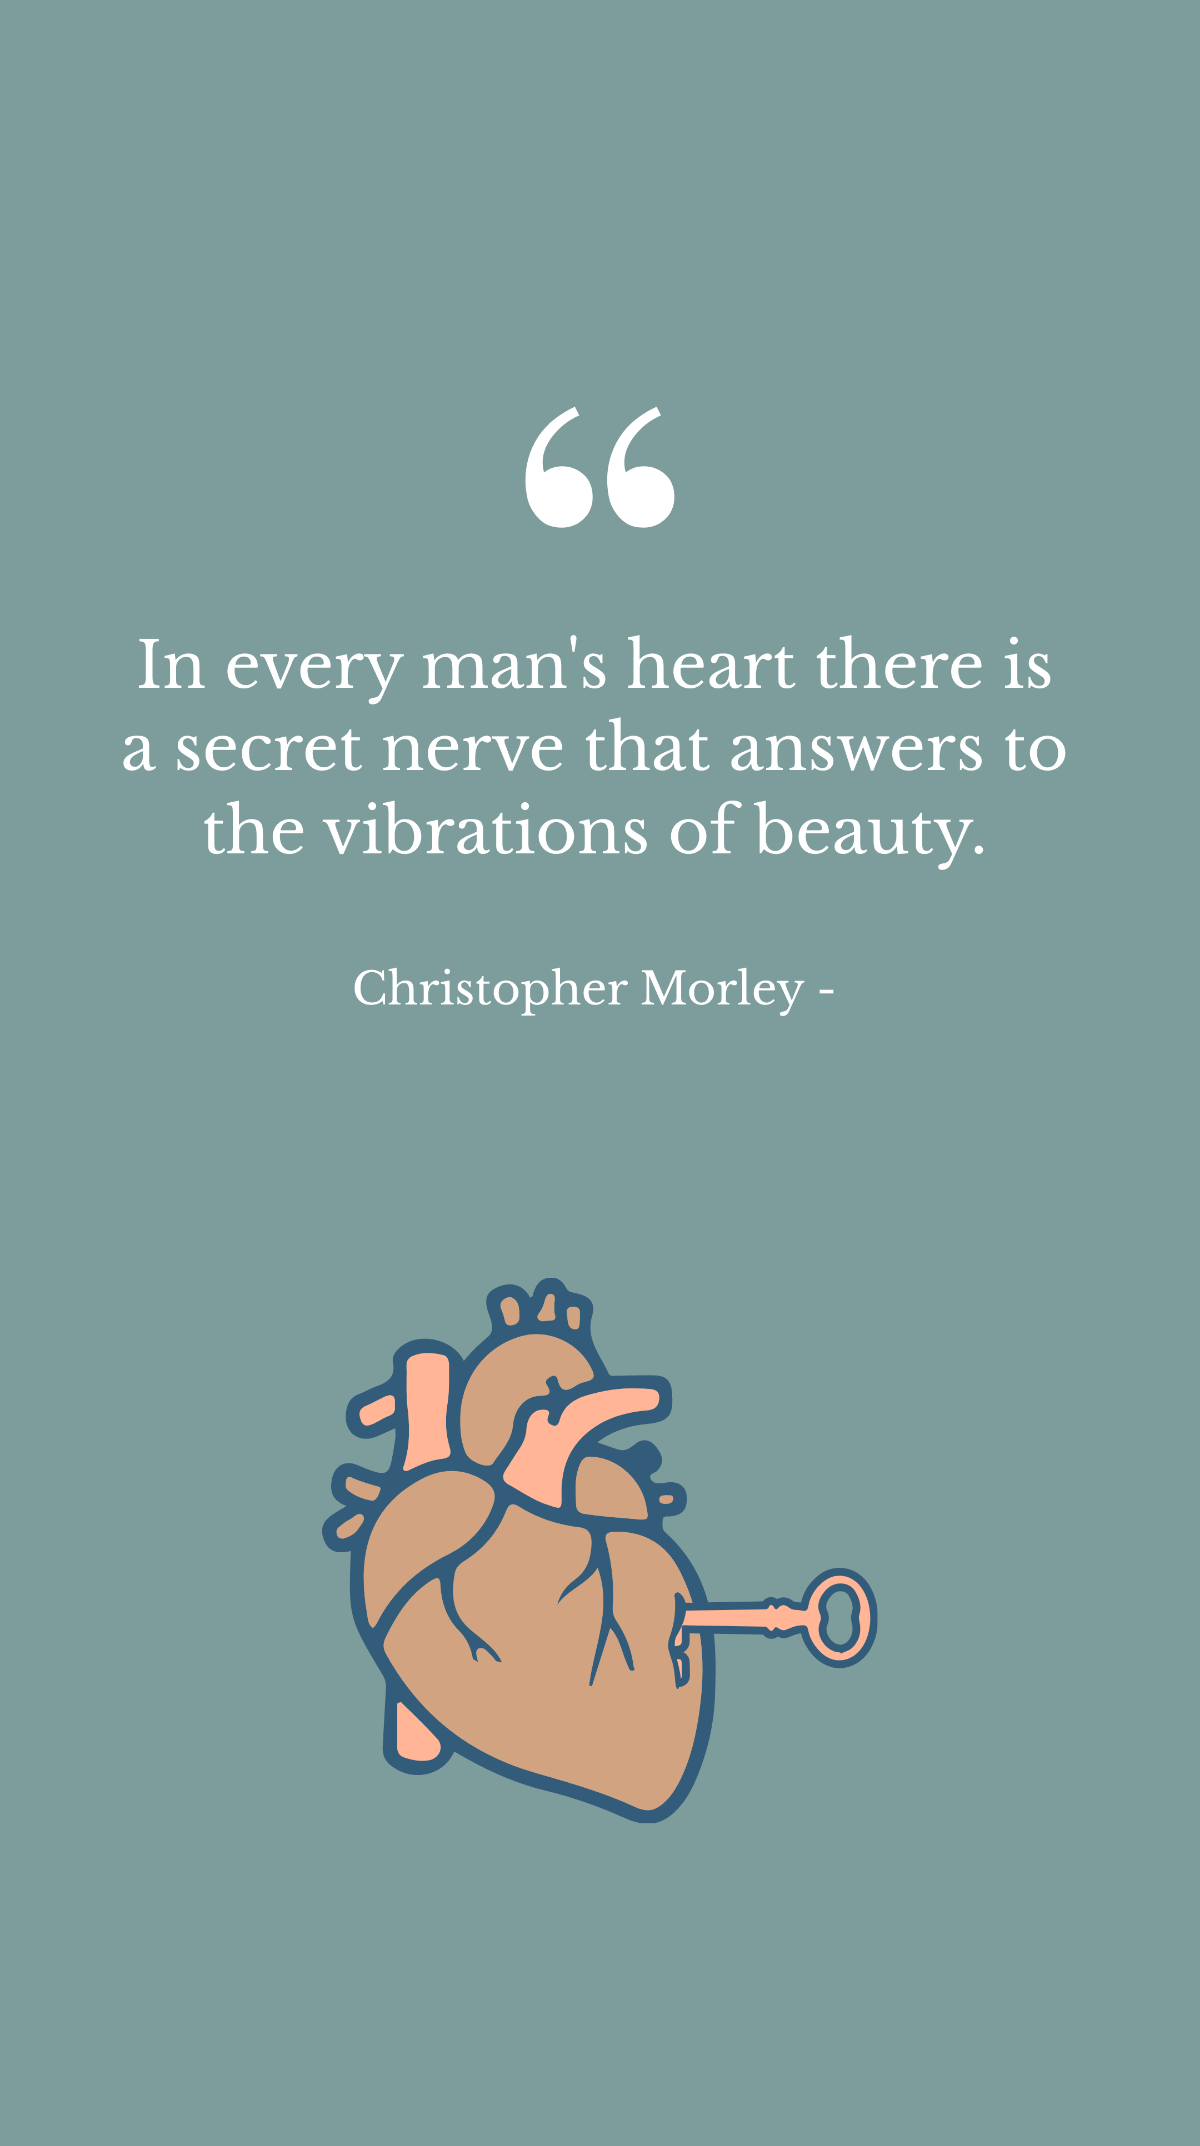 Free Christopher Morley - In every man's heart there is a secret nerve that answers to the vibrations of beauty. Template